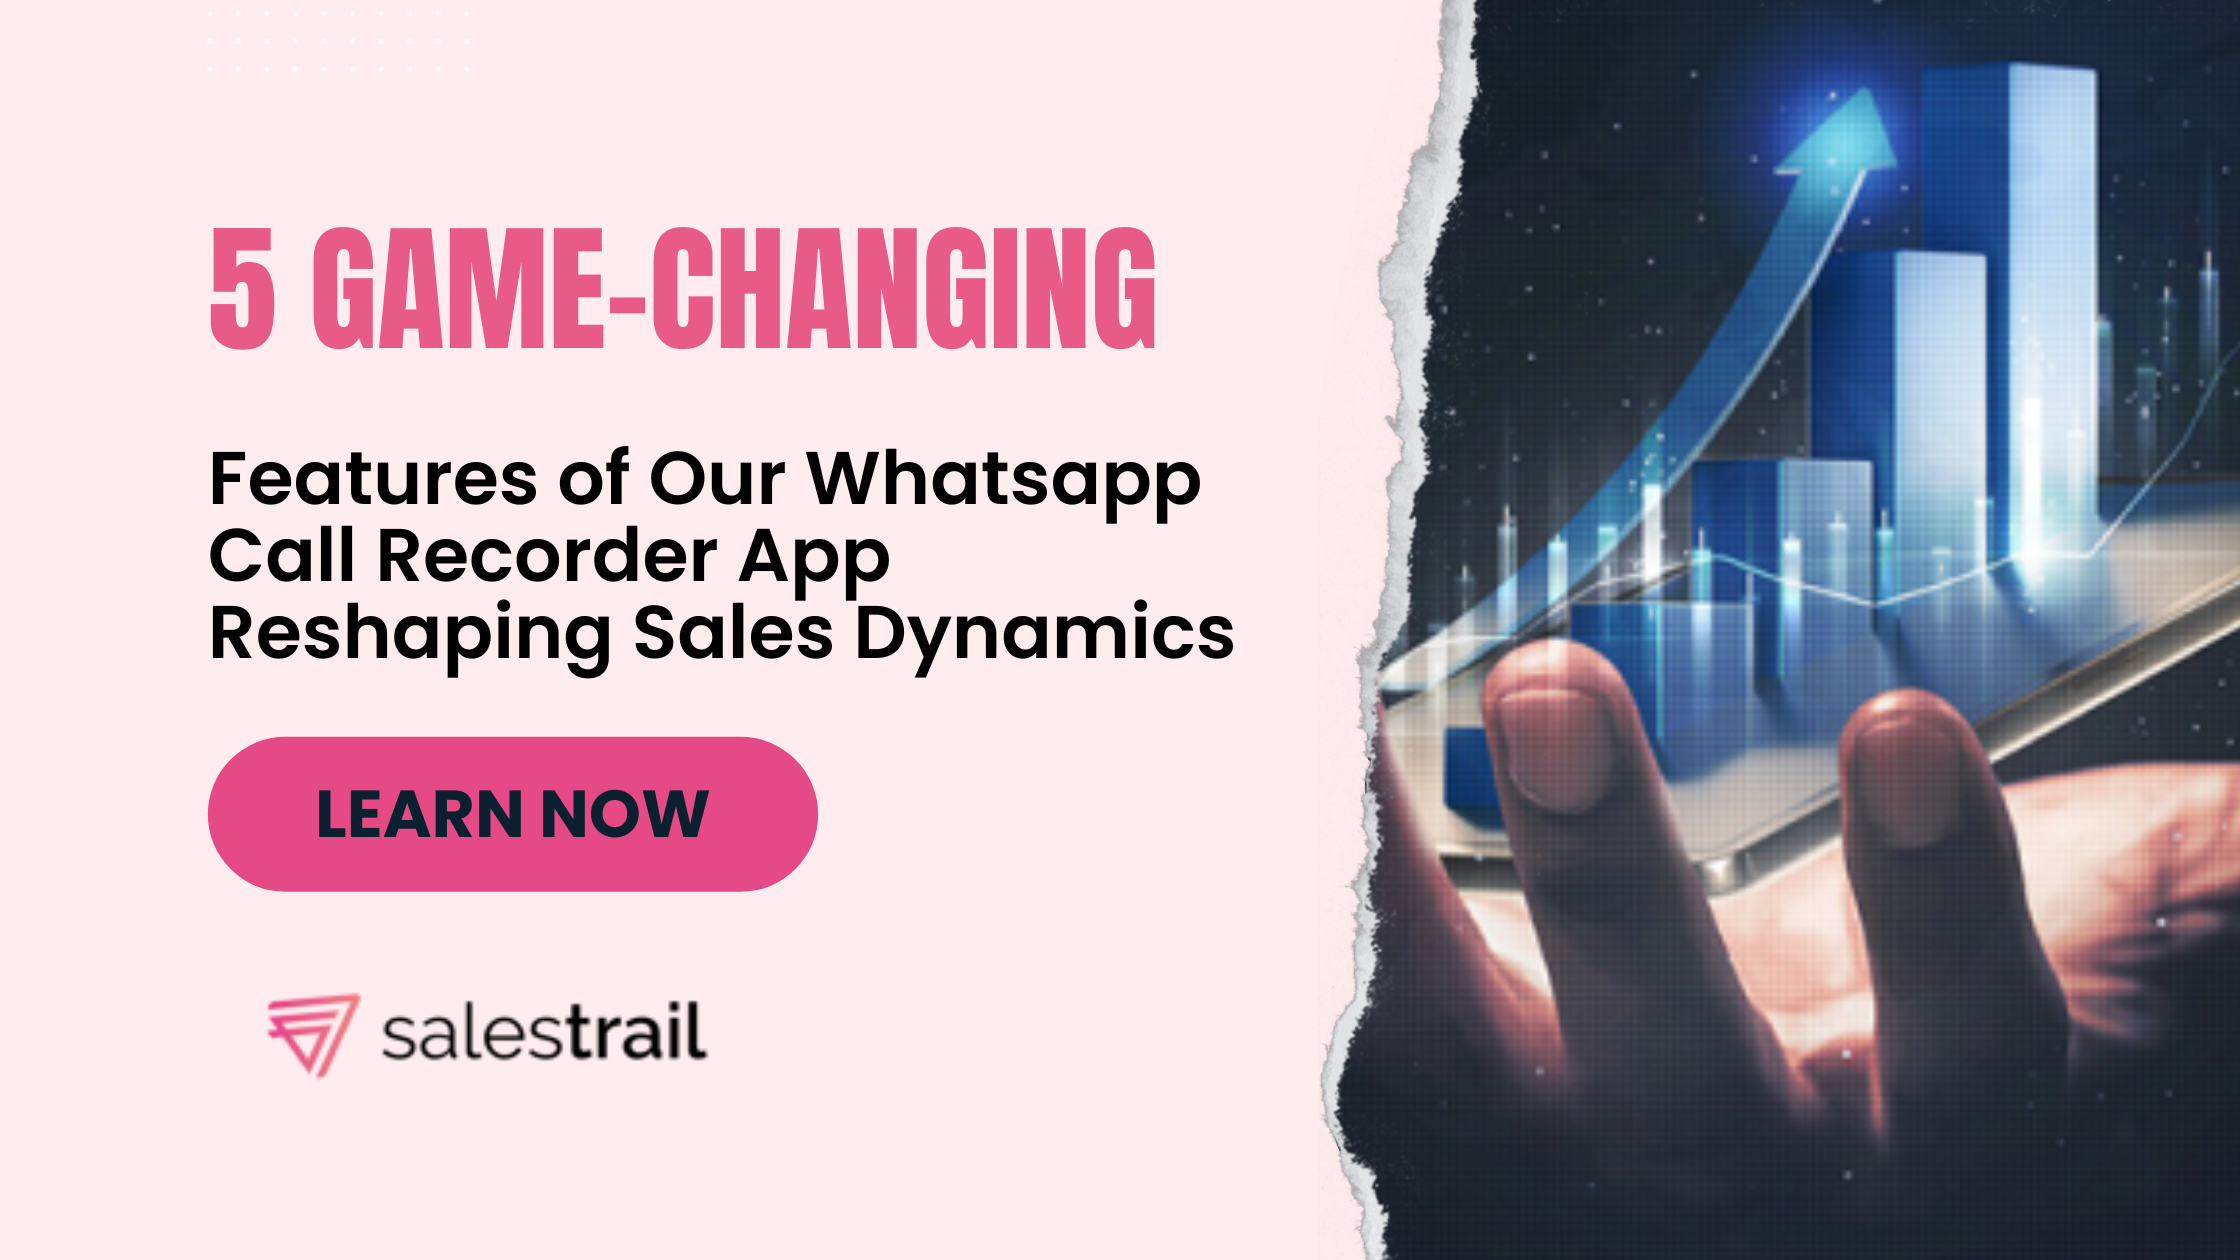 5 Game-Changing Features of Our Whatsapp Call Recorder App Reshaping Sales Dynamics  (1)